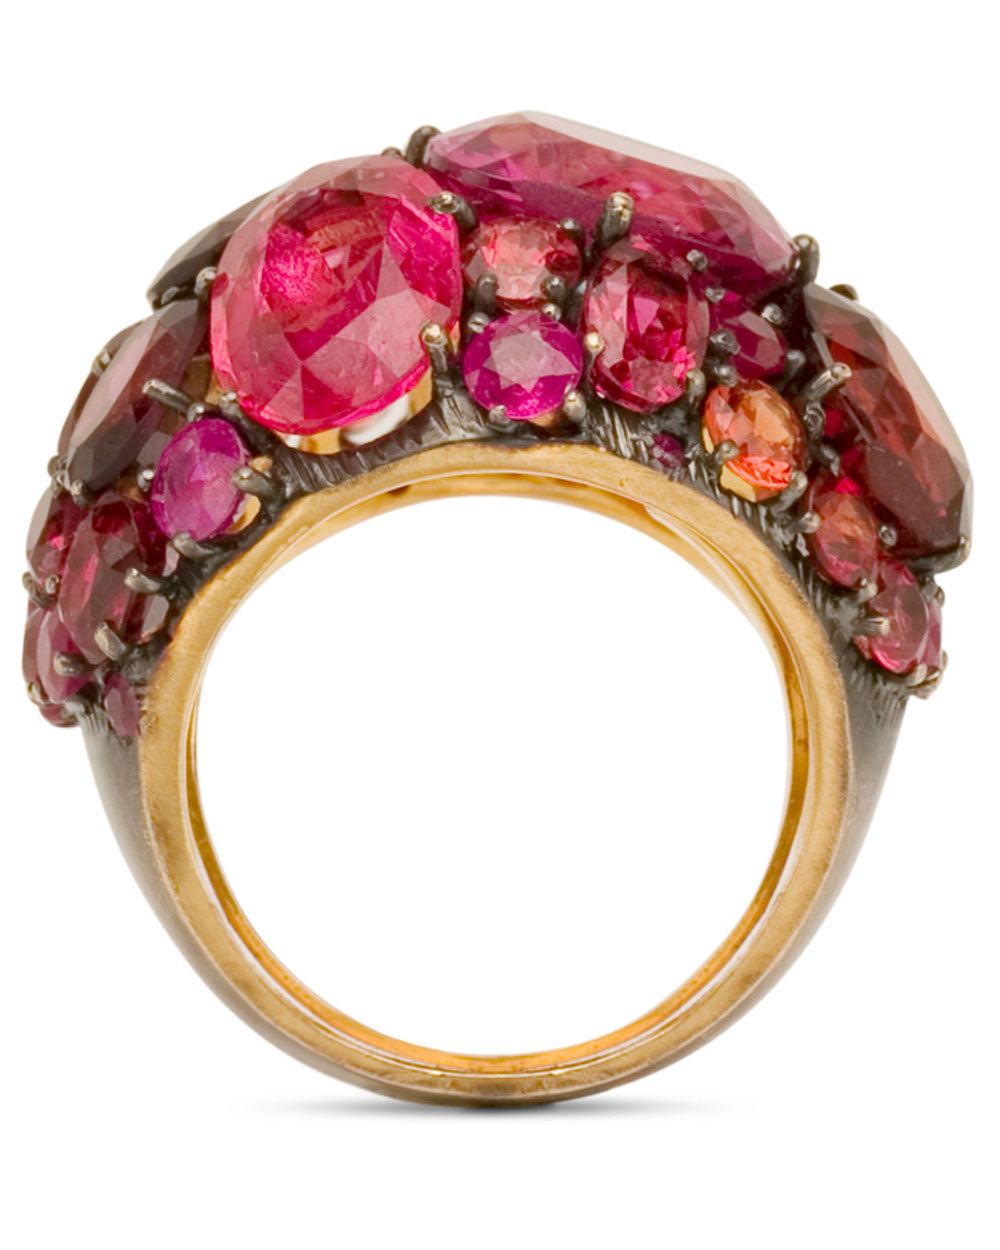 Caballe Spinel and Garnet Large Dome Ring